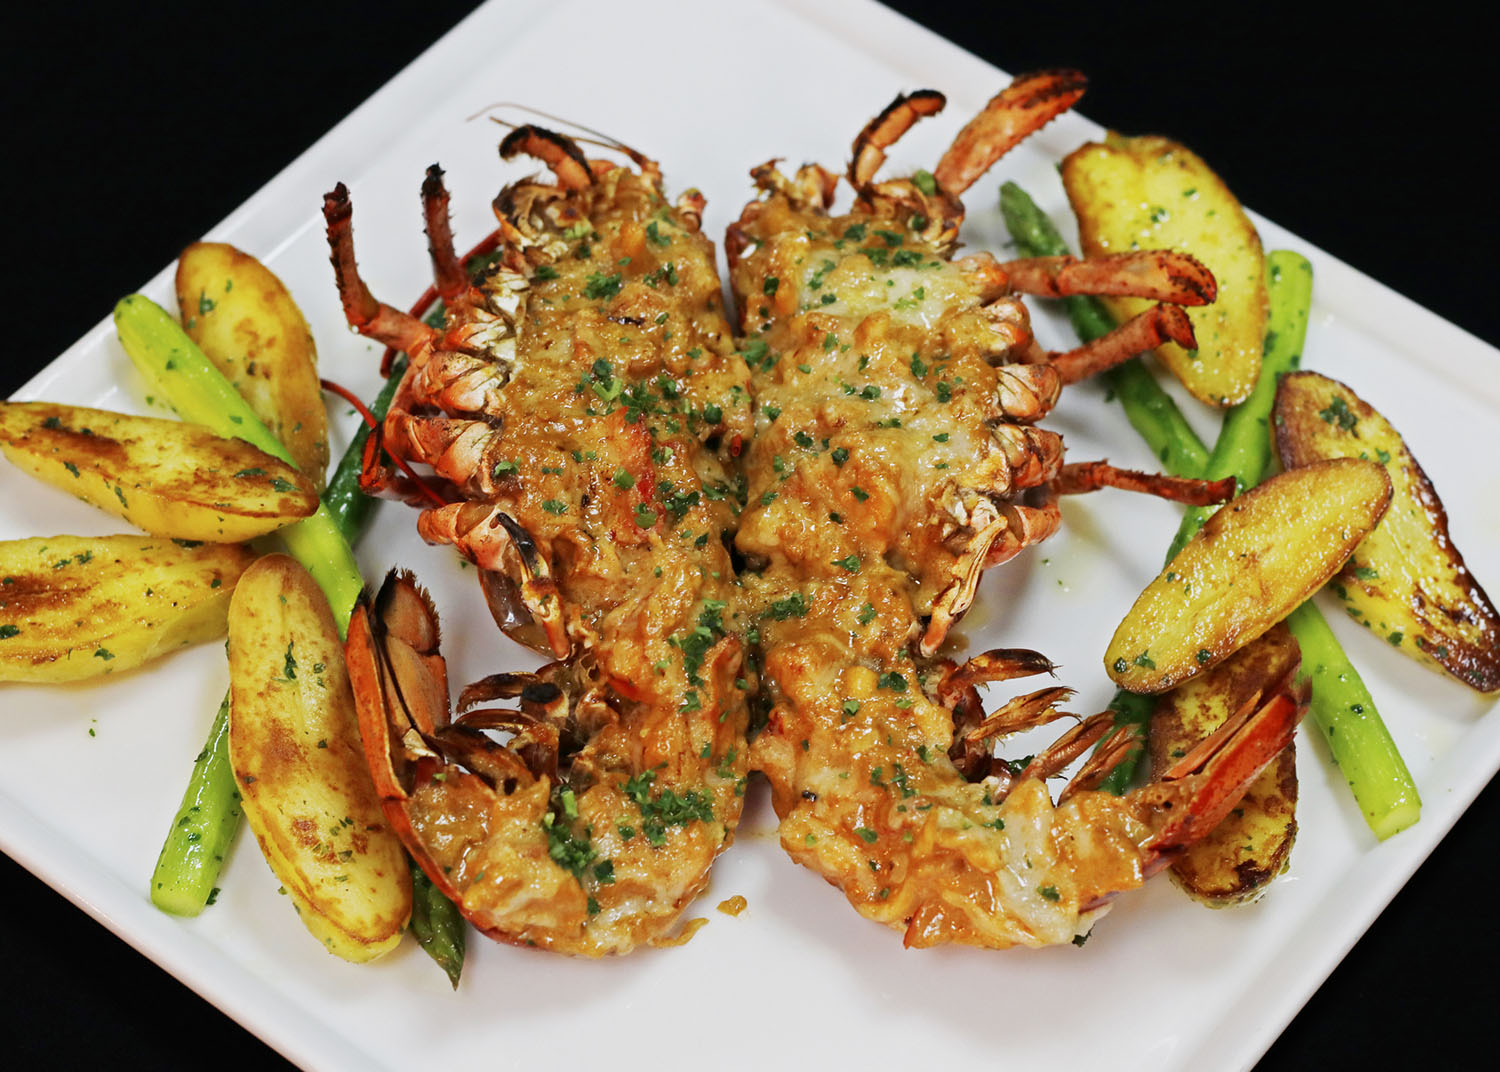 lobster thermidor served with glazed potato and asparagus in a platter, black background